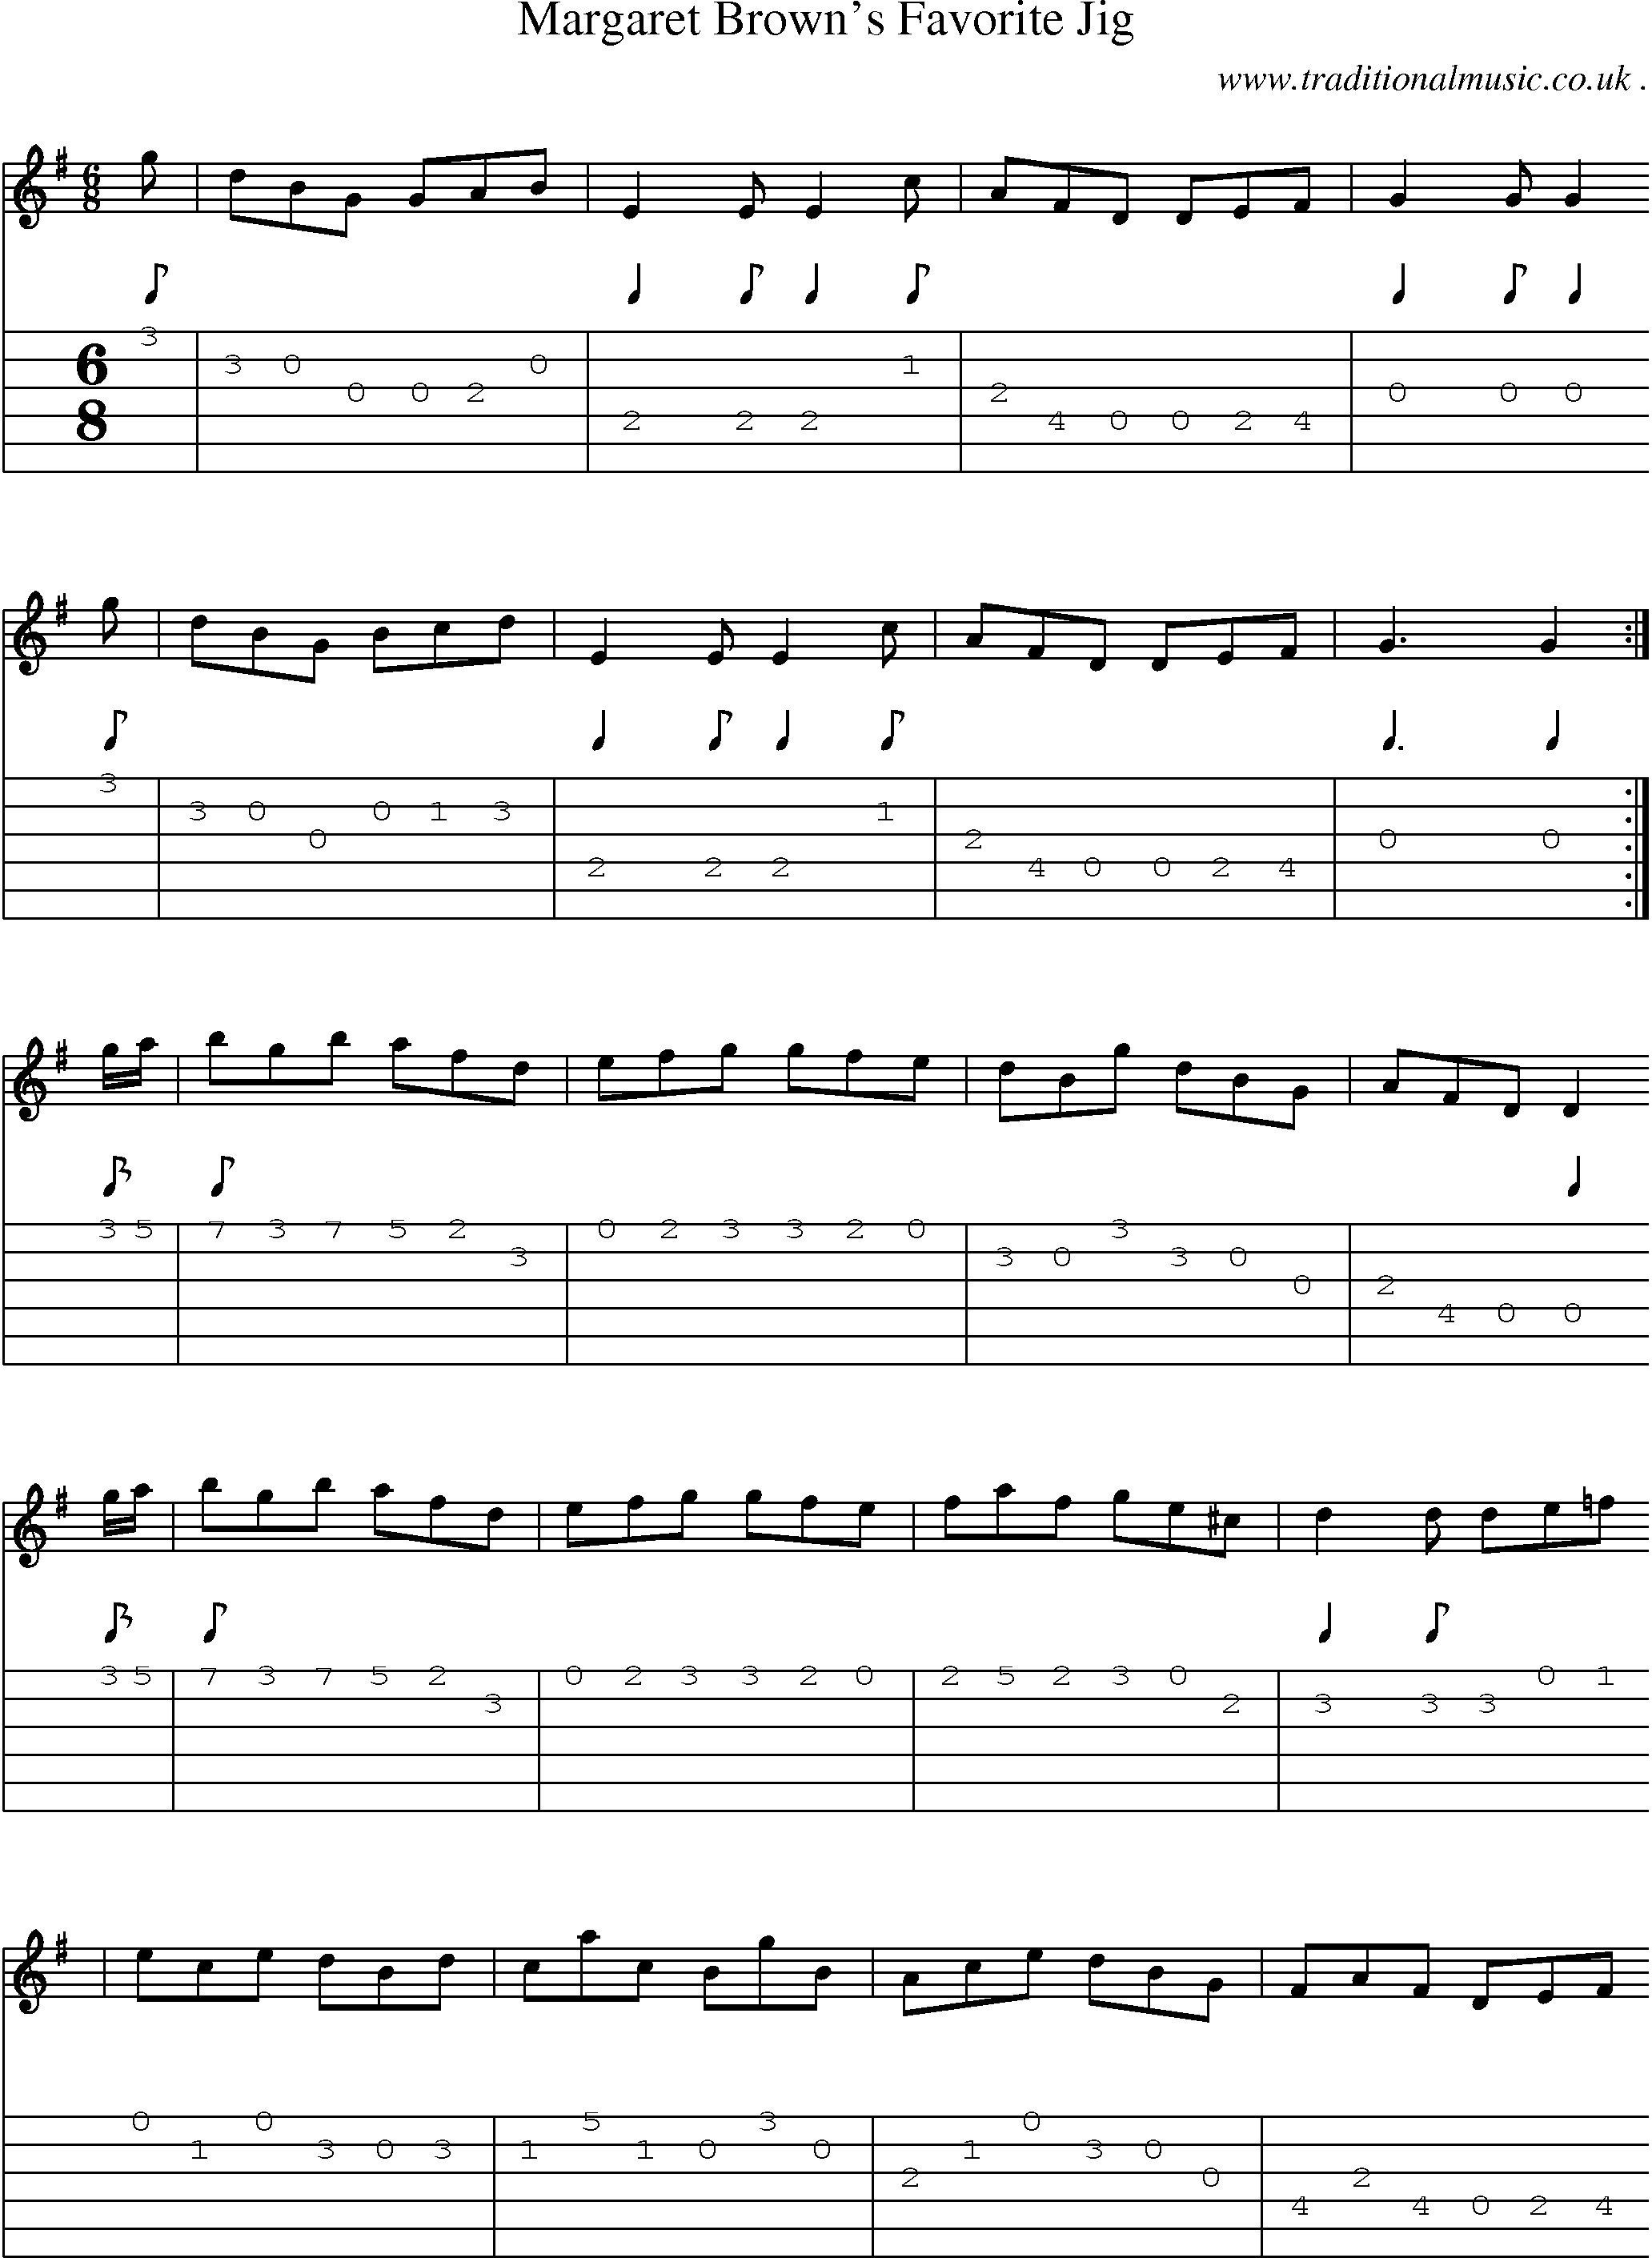 Sheet-music  score, Chords and Guitar Tabs for Margaret Browns Favorite Jig